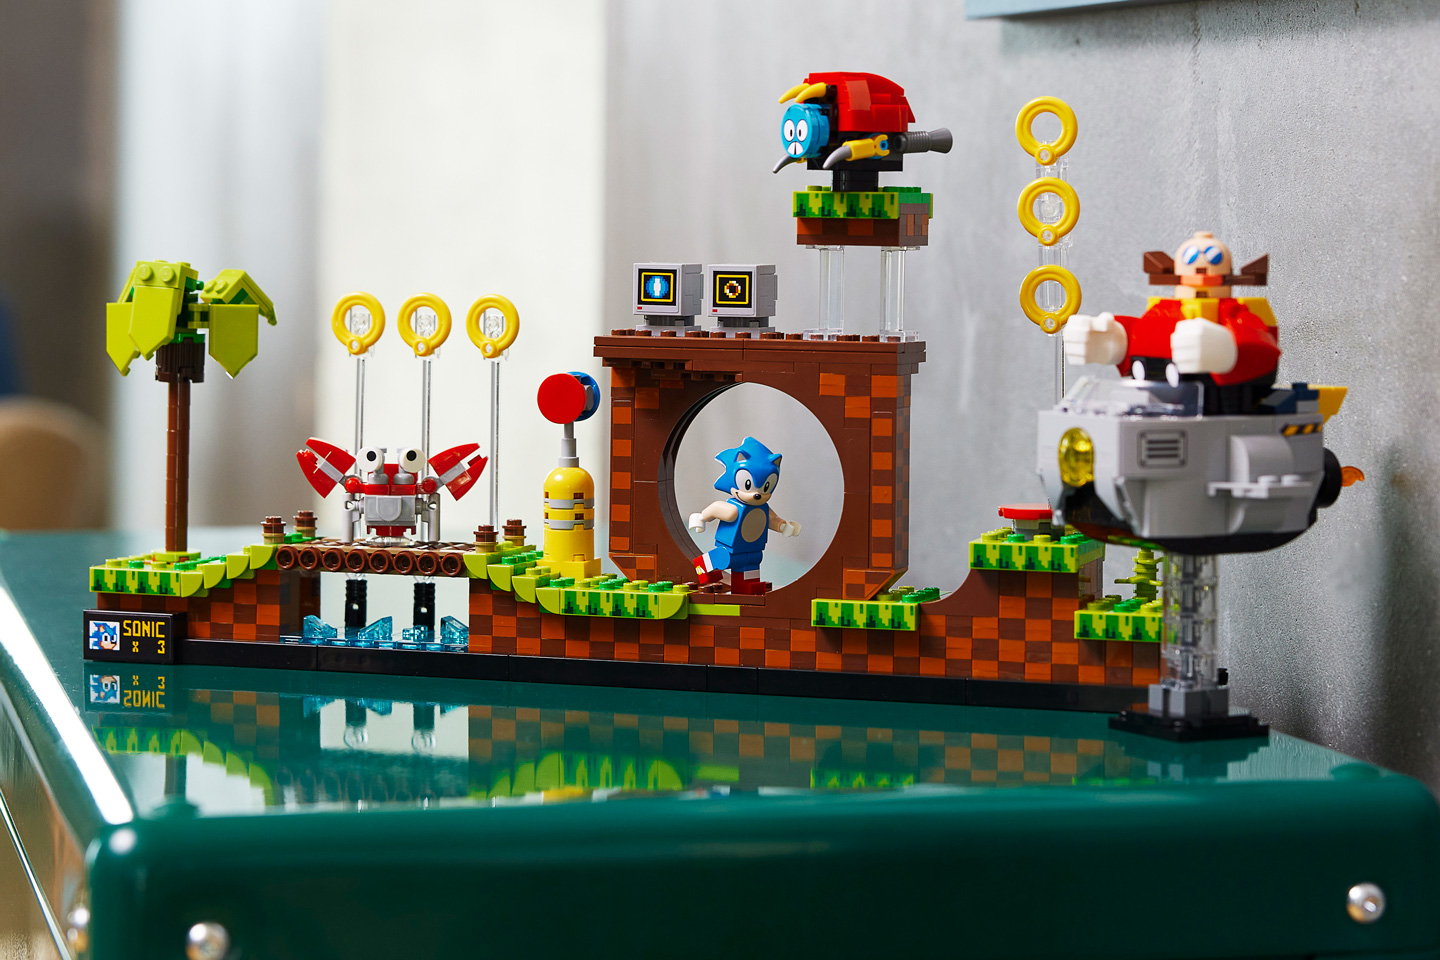 #LEGO Sonic The Hedgehog set comes with a highly detailed track and even the evil Dr. Eggman